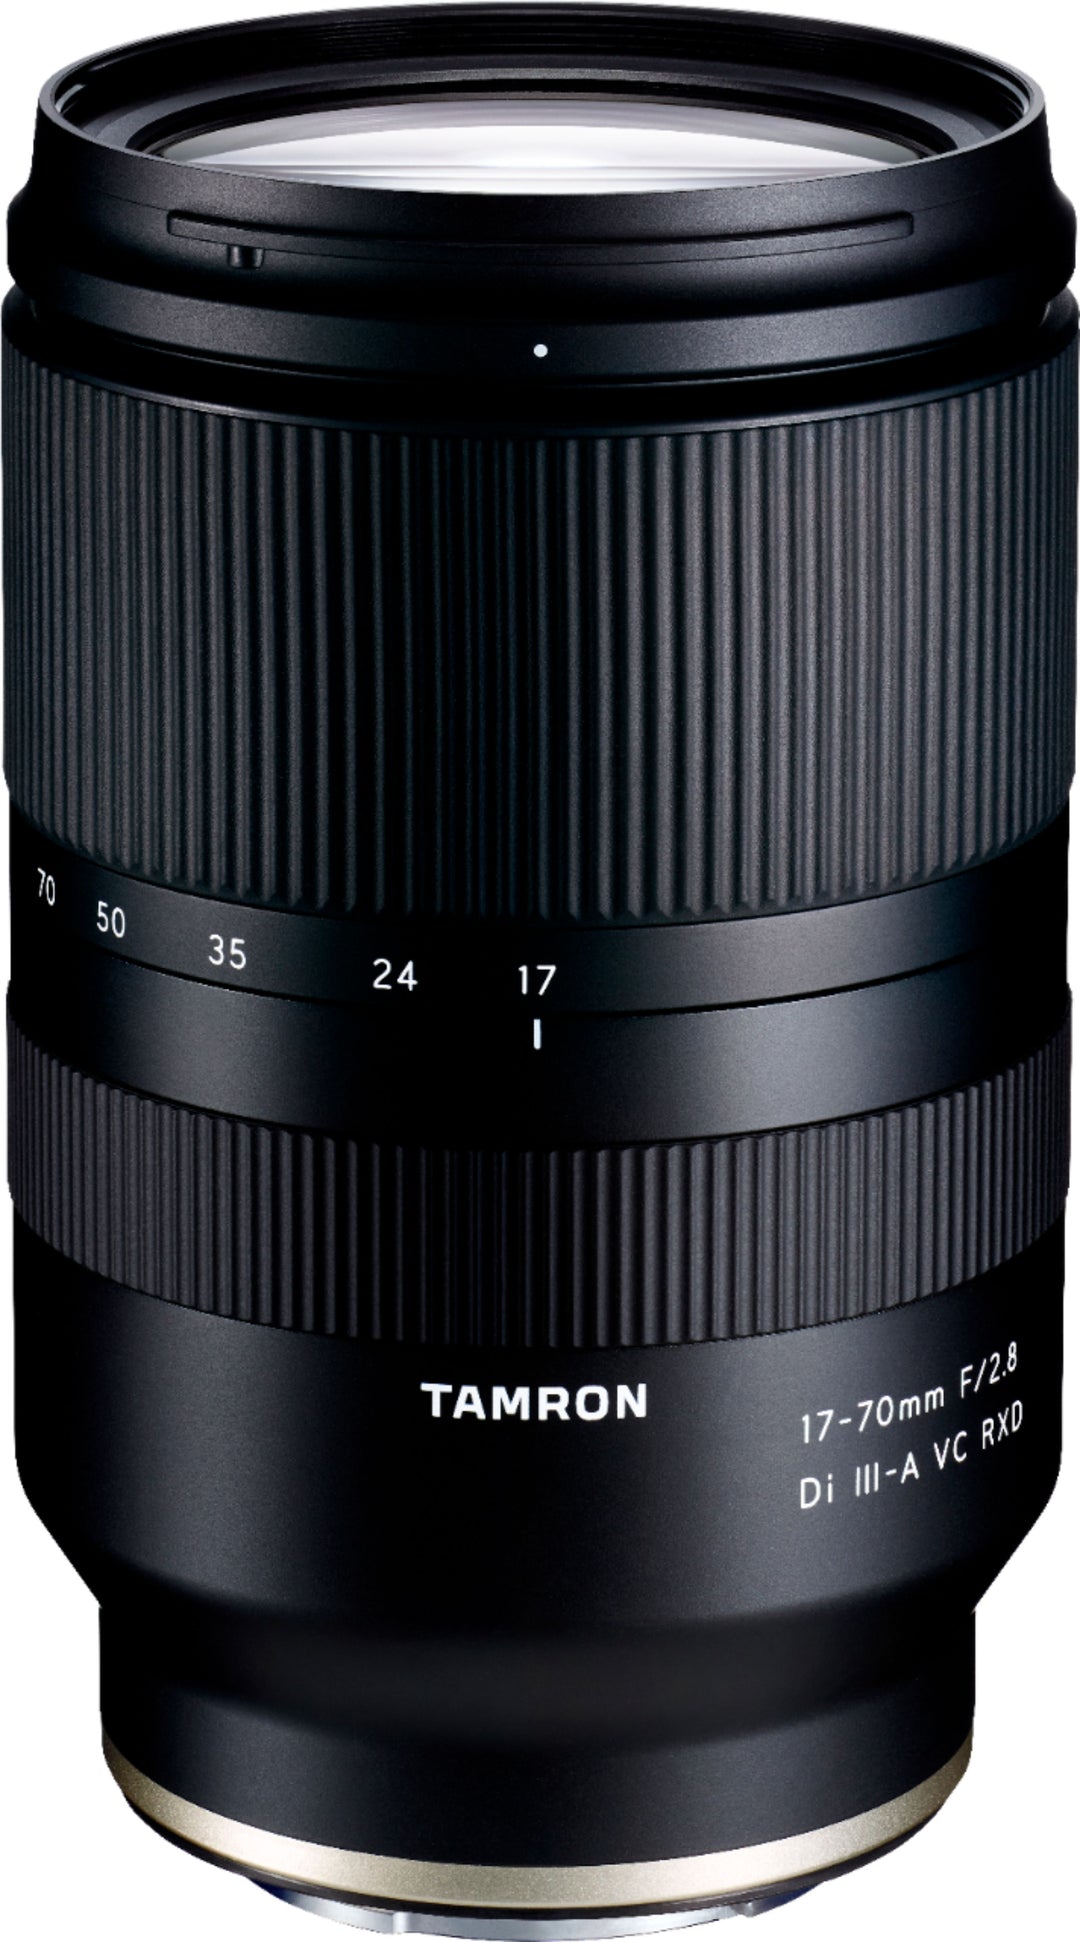 Tamron - 17-70mm F/2.8 Di III-A VC RXD Standard Zoom Lens for Sony E-Mount_0